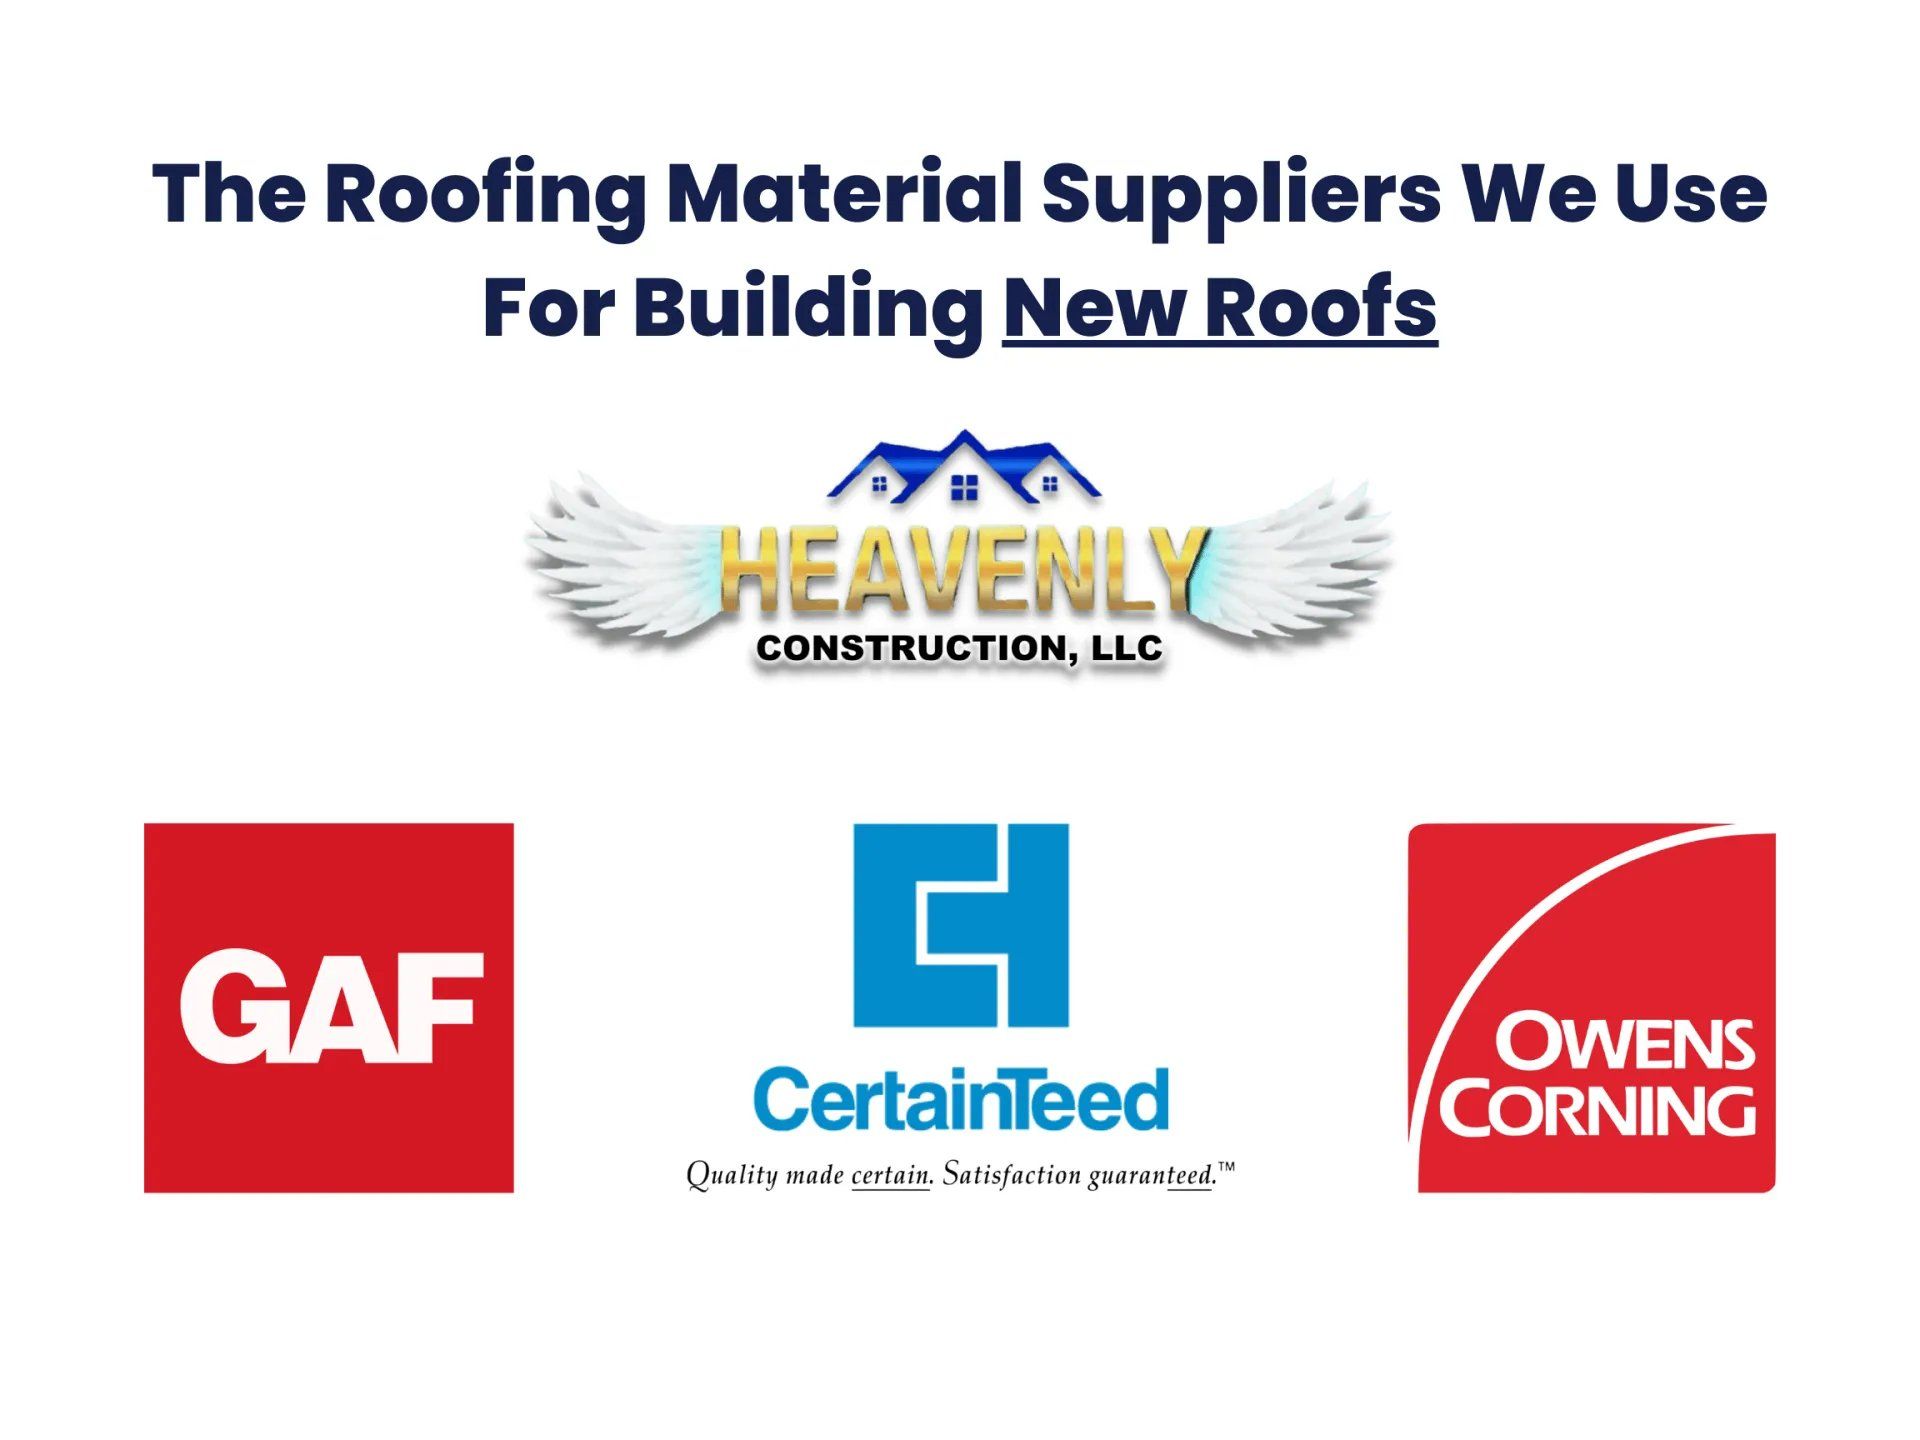 GAF, CertainTeed, and Owens Corning logos. Roof installation suppliers for Heavenly Construction.